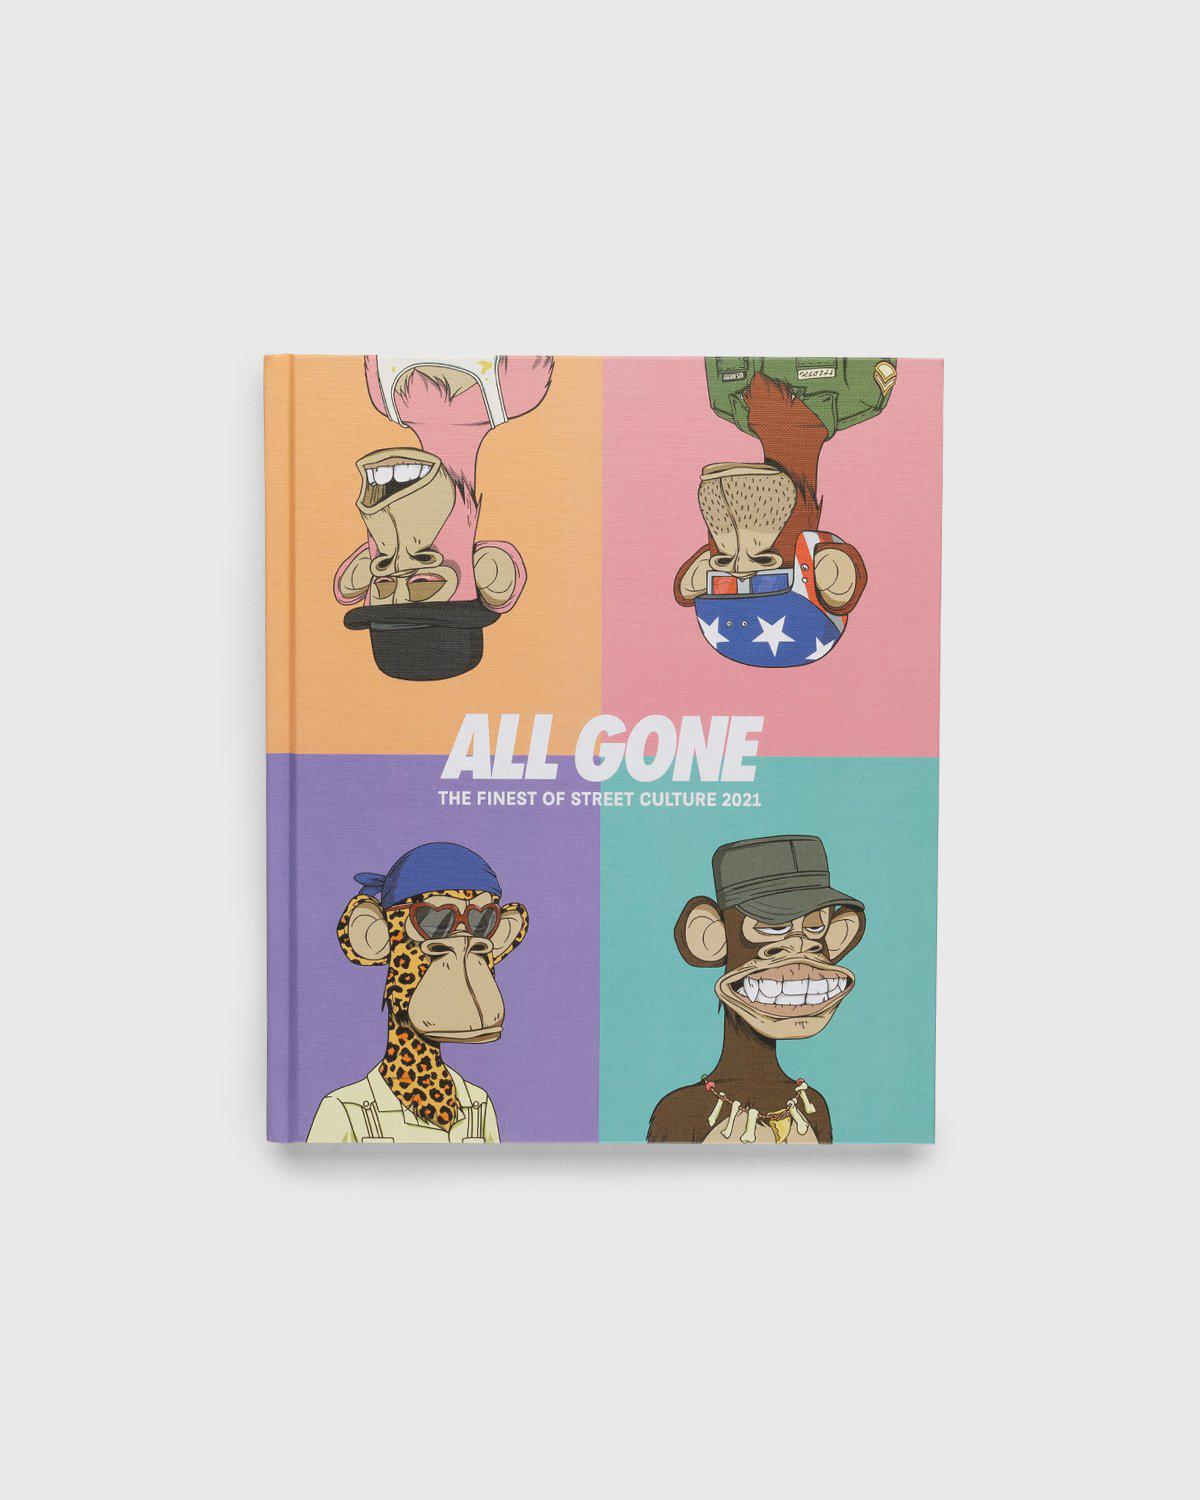 All Gone – 2021 Ape Shall Never Kill (Bored) Ape by ALL GONE